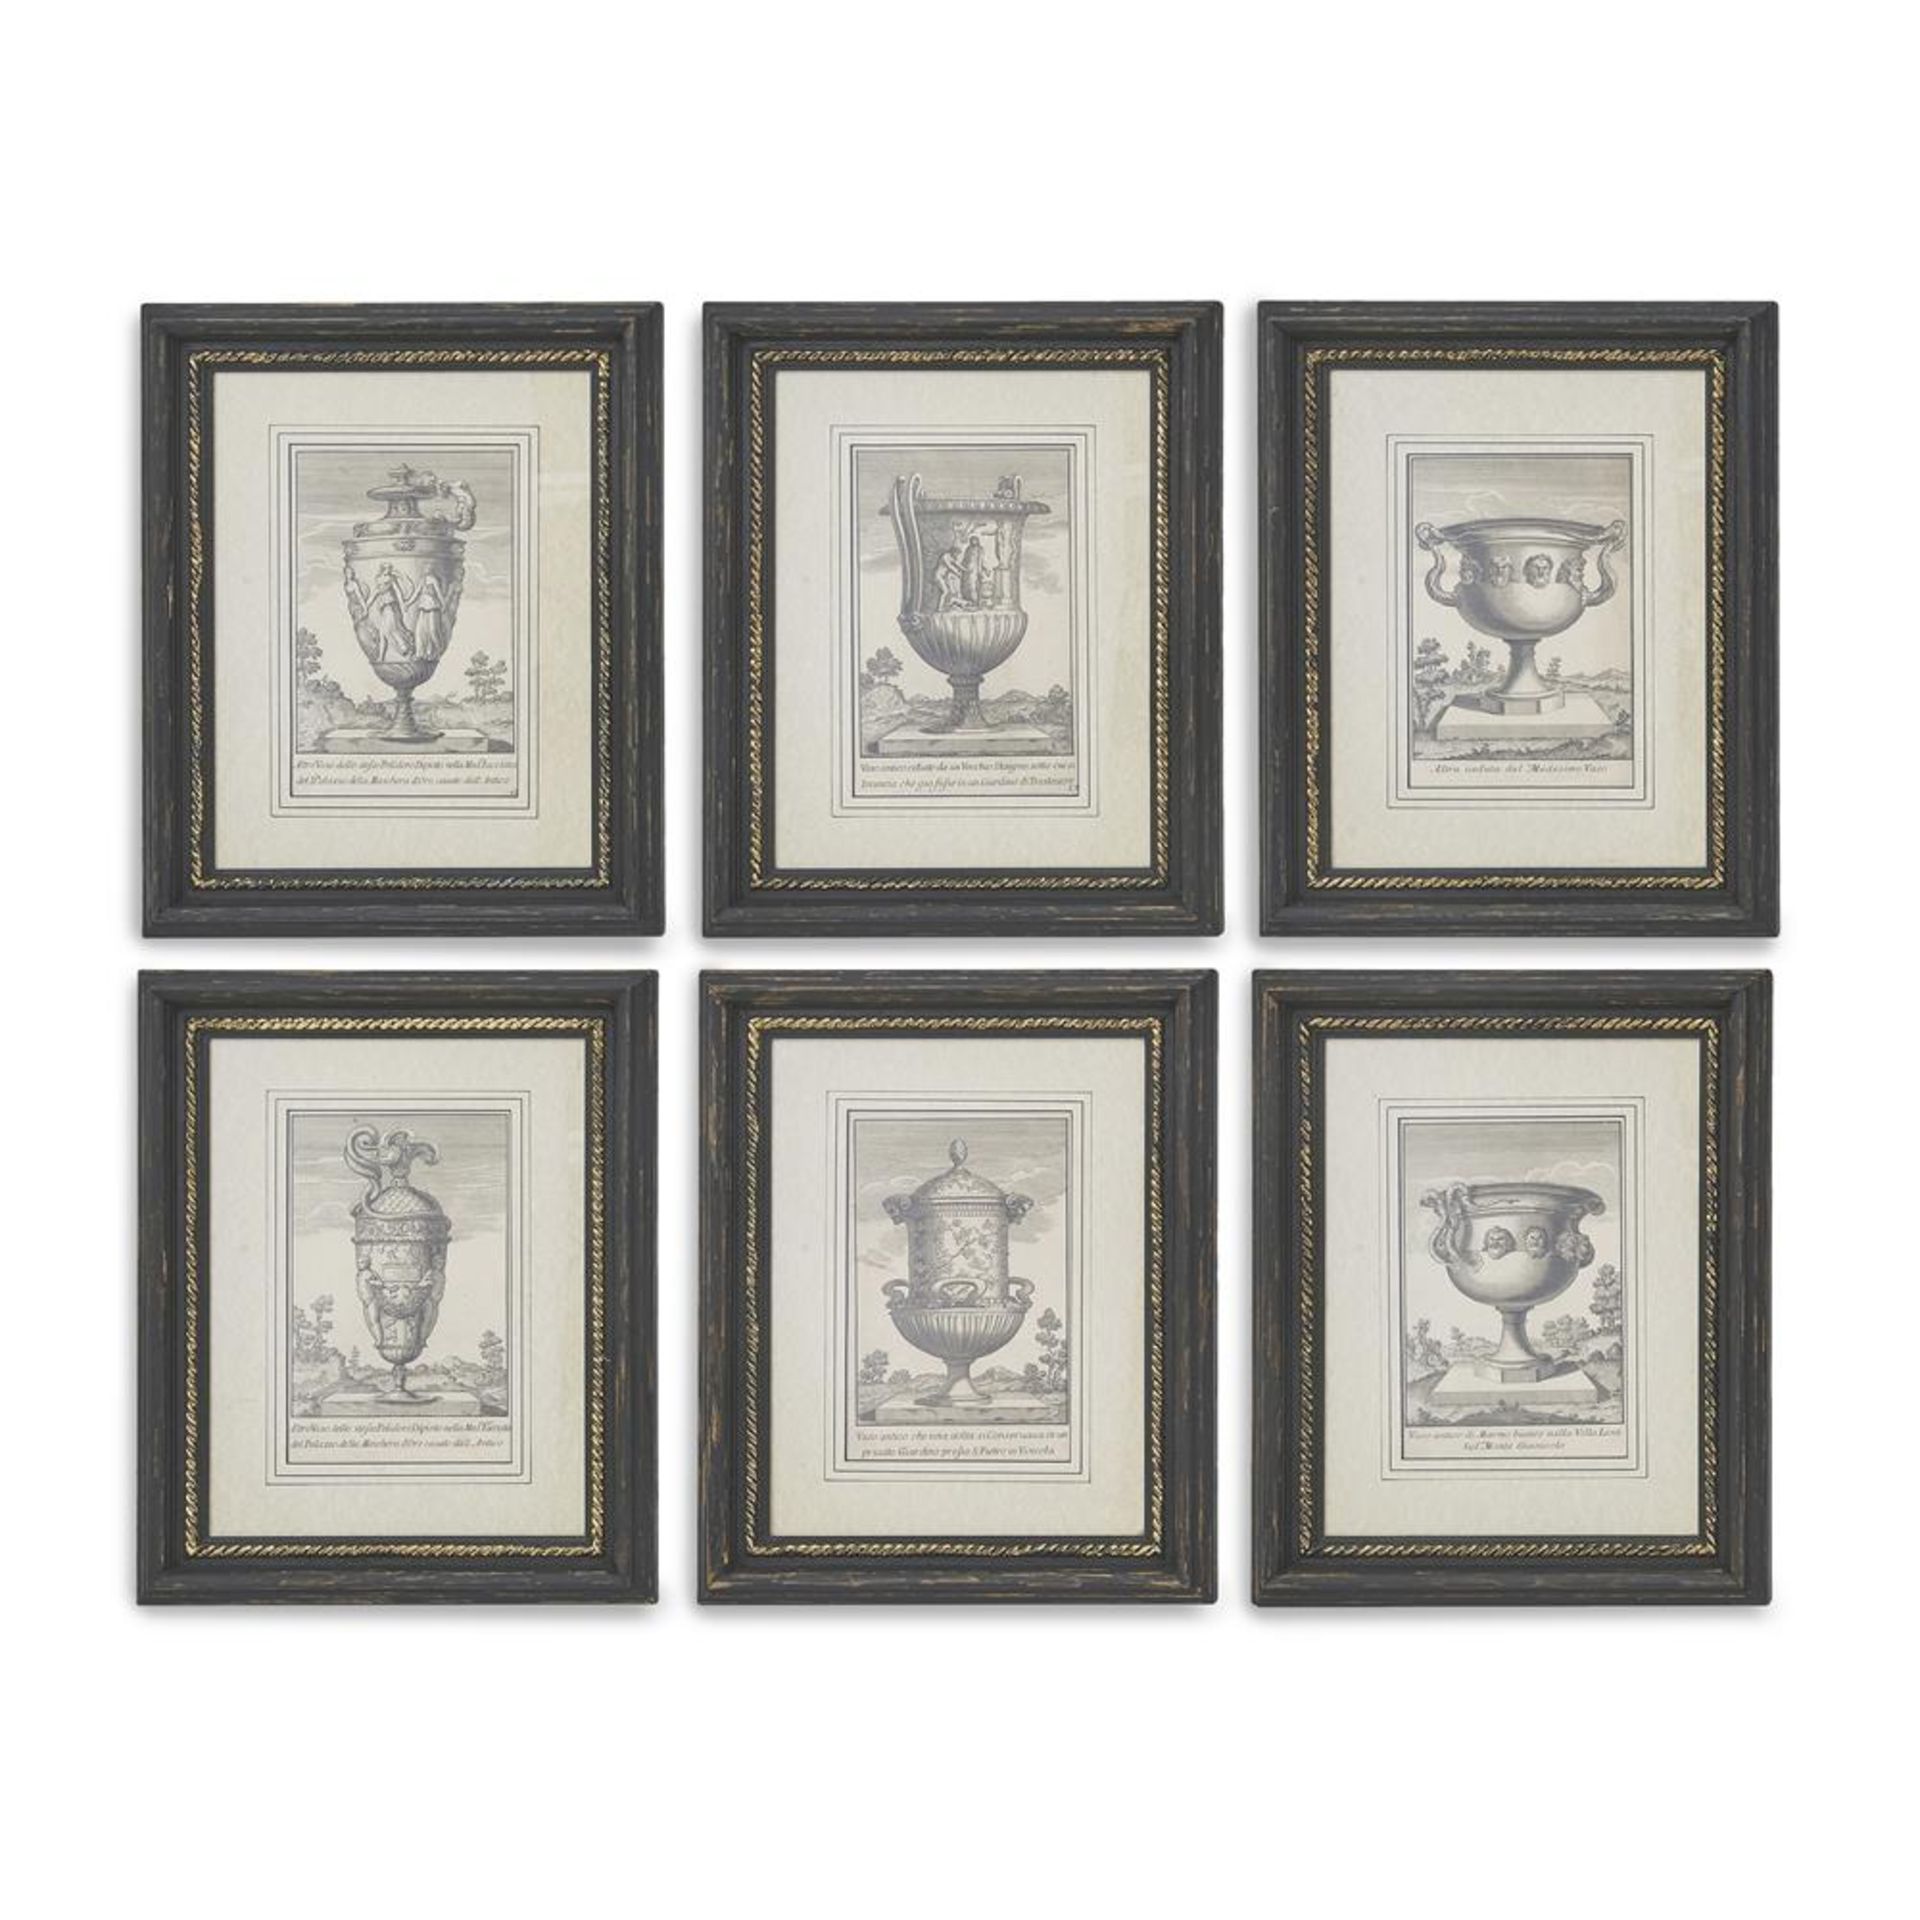 A SET OF SIX ENGRAVINGS AFTER DOMENICO DE ROSSI ITALIAN, 18TH CENTURY